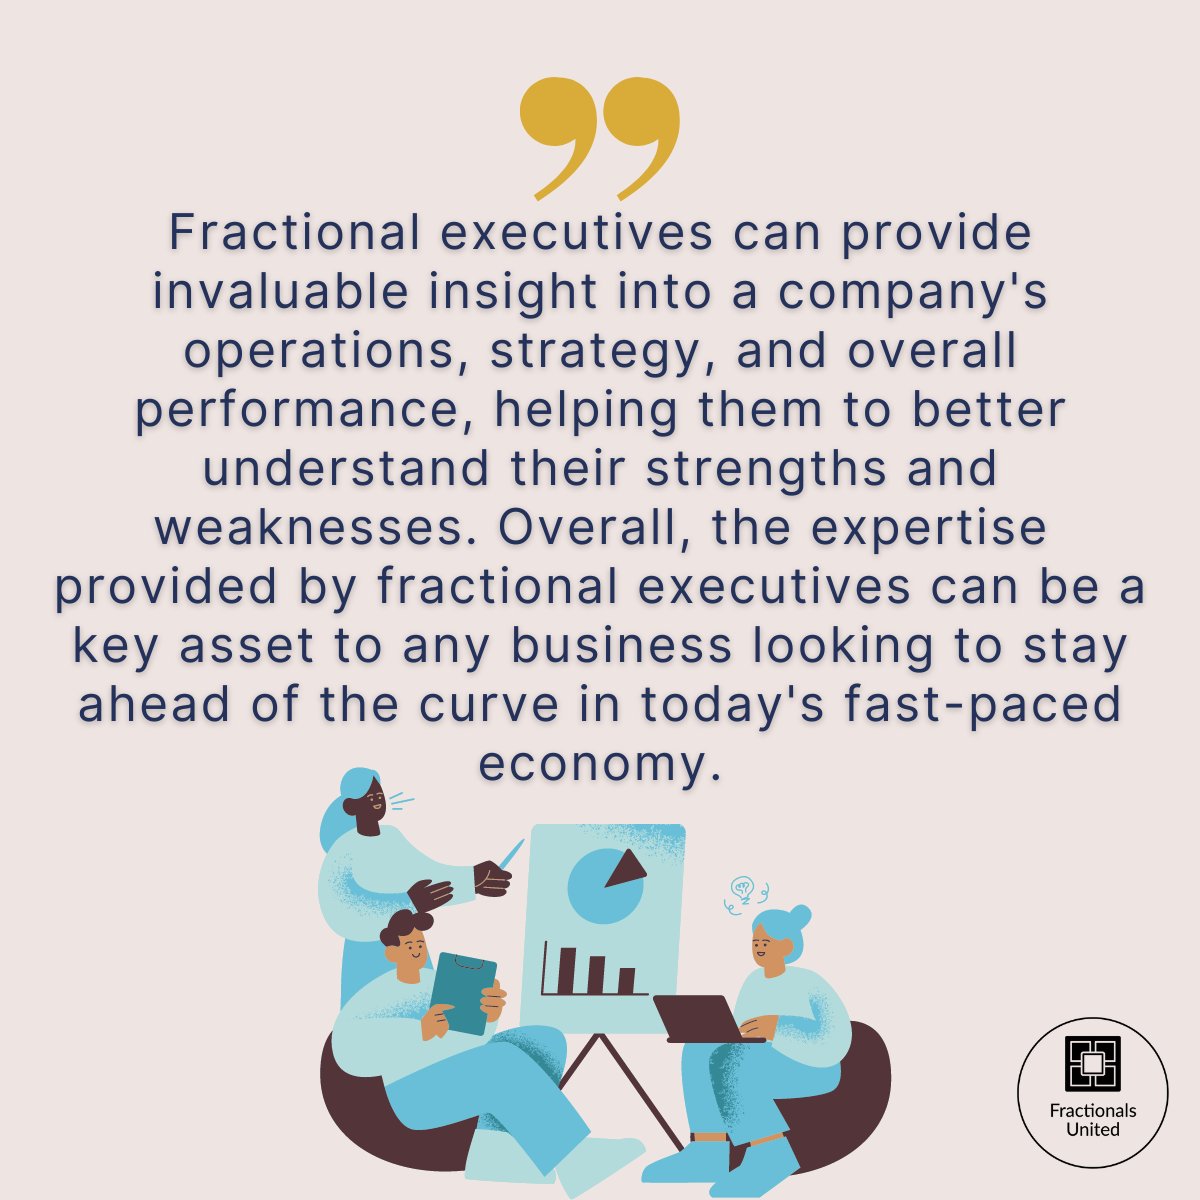 Fractional executives can provide invaluable insight into a company's operations, strategy, &  overall performance, helping them to better understand their strengths and weaknesses and identify areas for improvement.
#fractional #fractionalleader #leadership #fractionalexecutives